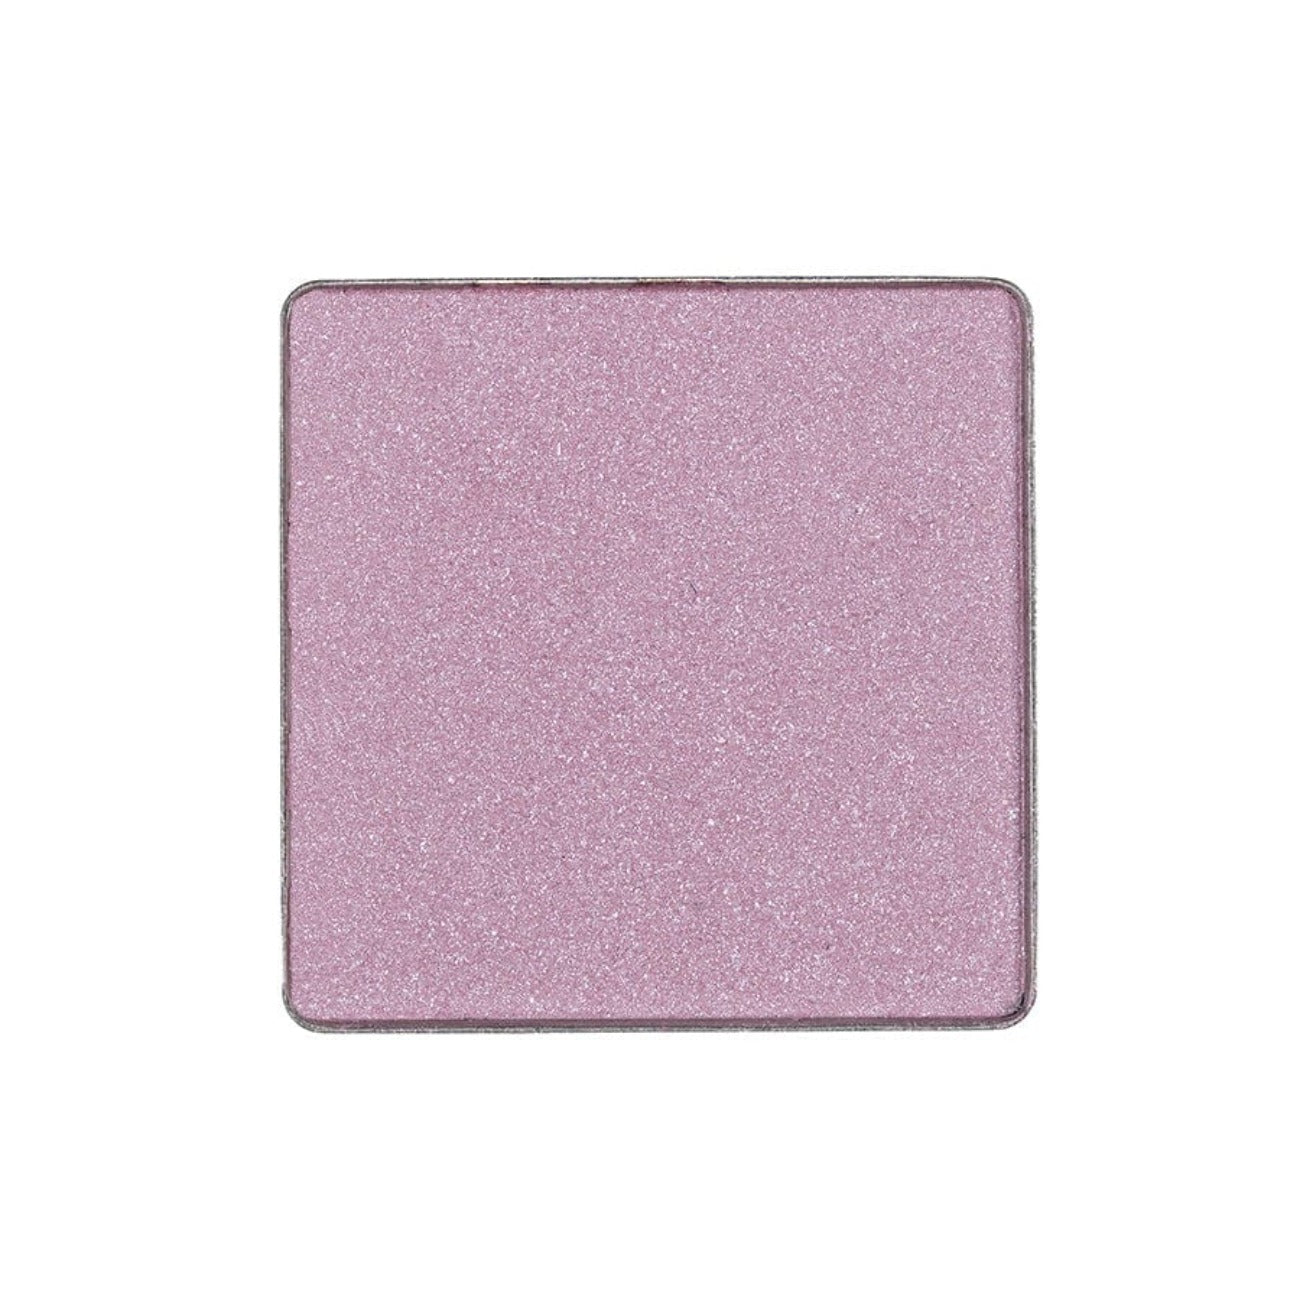 Prismatic Pink Eyeshadow for Refillable Make Up Palette 1.5g